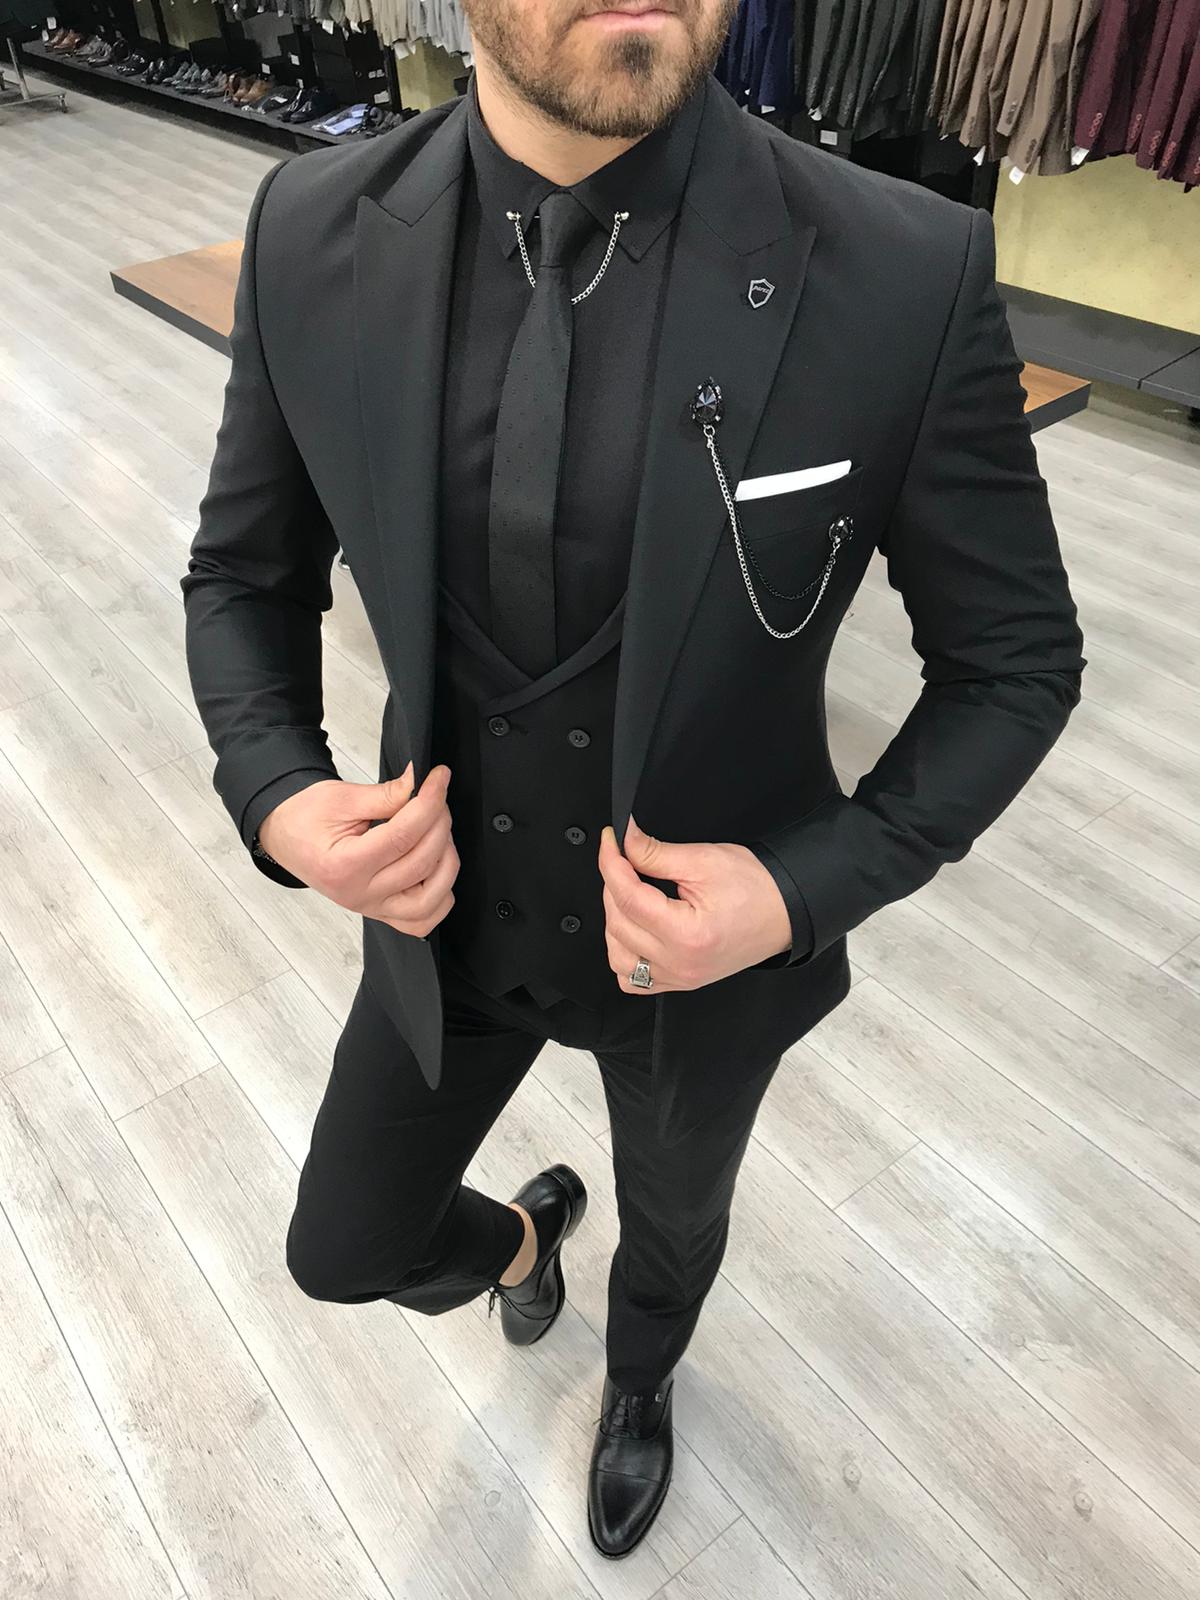 When To Wear a Black Tie - Ultimate Guide by GentWith Blog